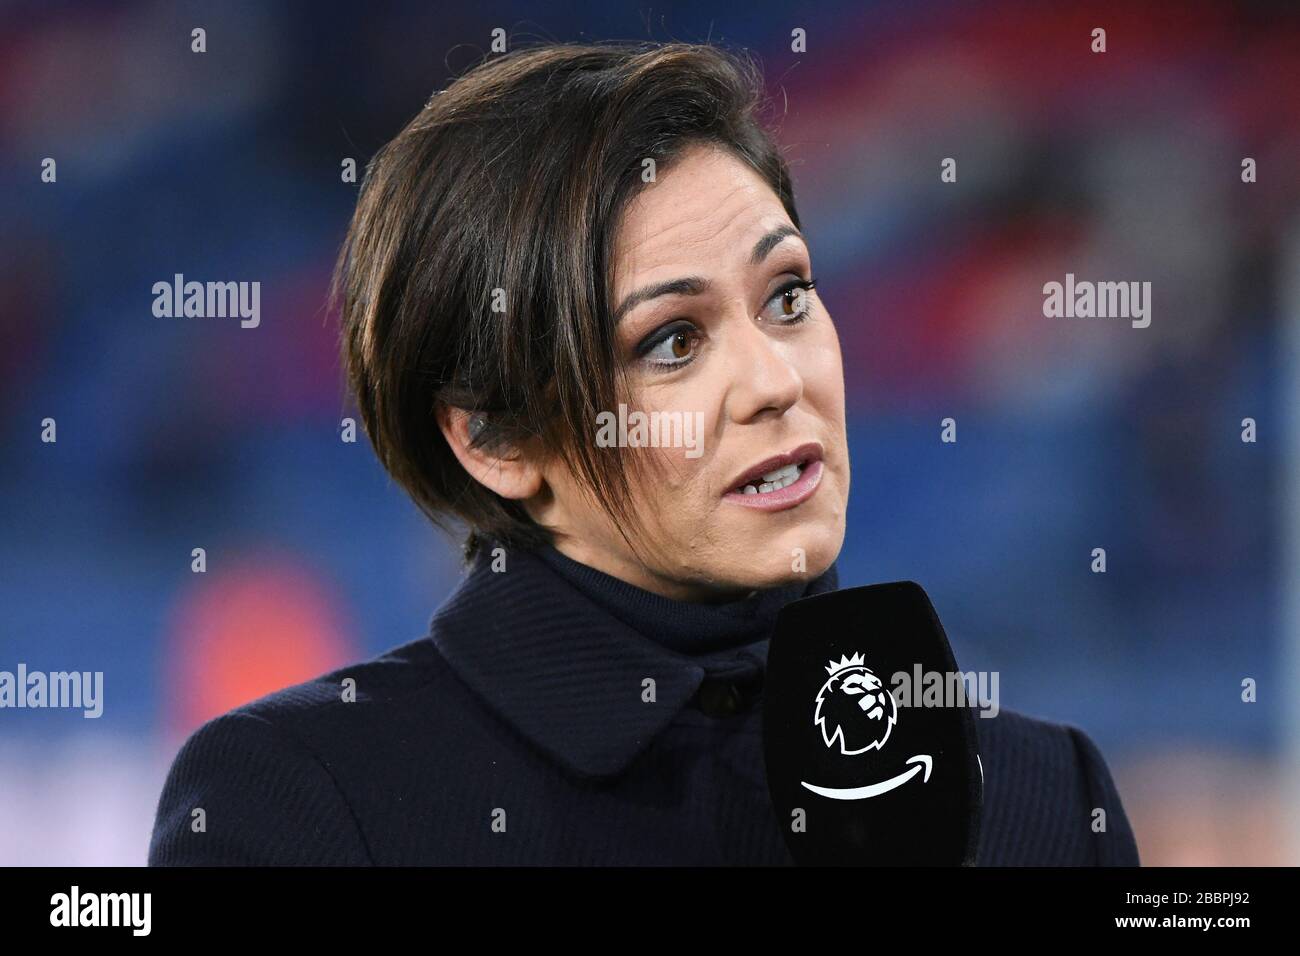 TV Presenter, Eilidh Barbour is seen holding an Amazon Prime TV Microphone  - Crystal Palace v AFC